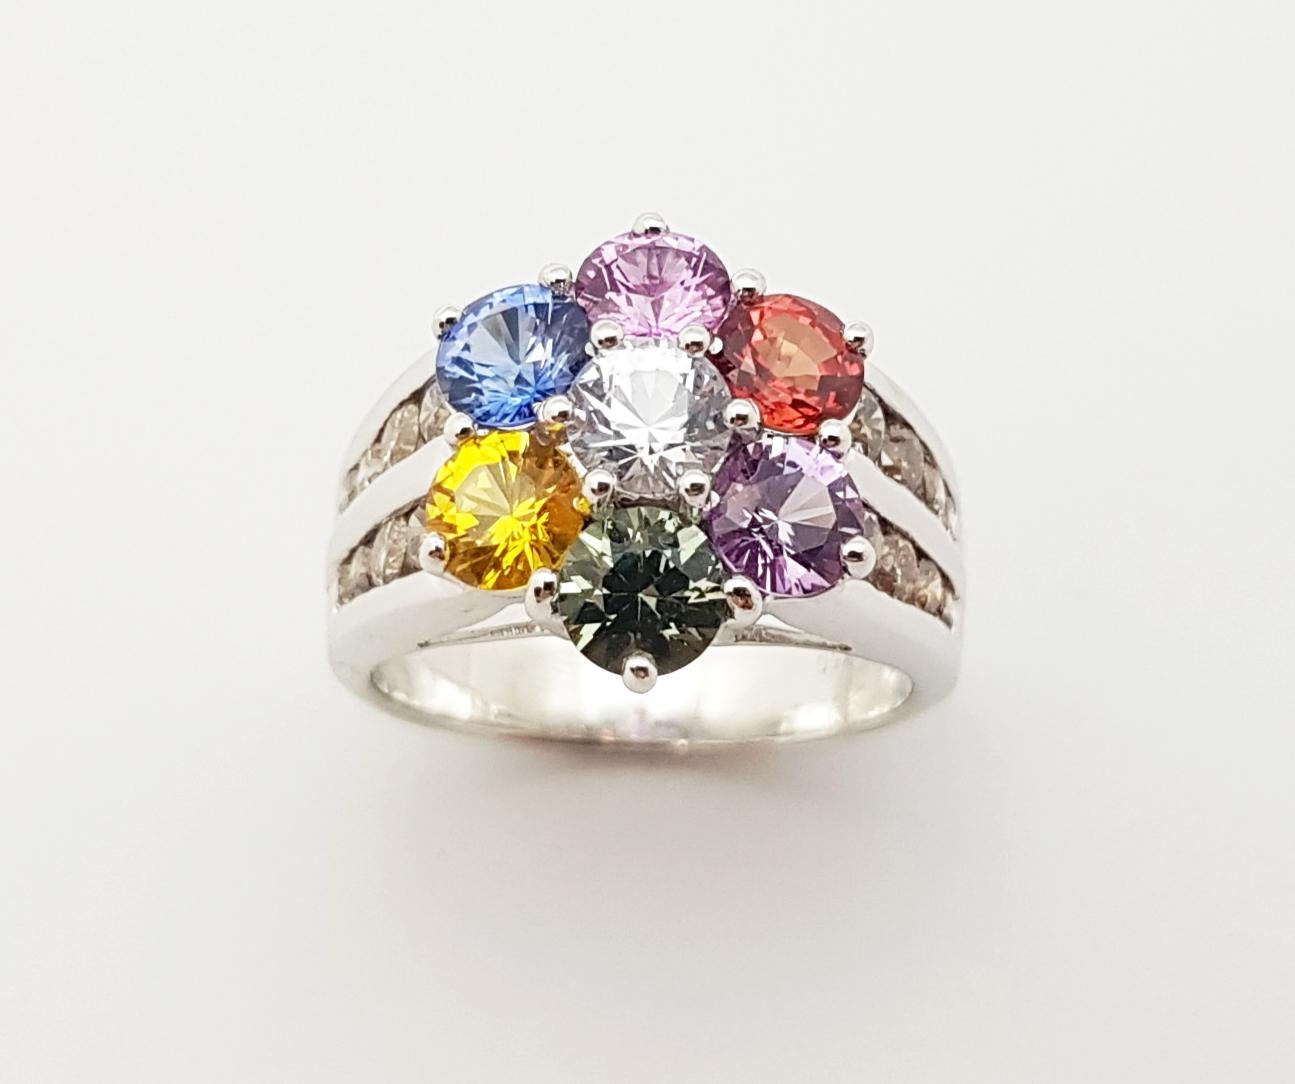 Rainbow Color Sapphire with Brown Diamond Ring Set in 18 Karat White Gold Set For Sale 3